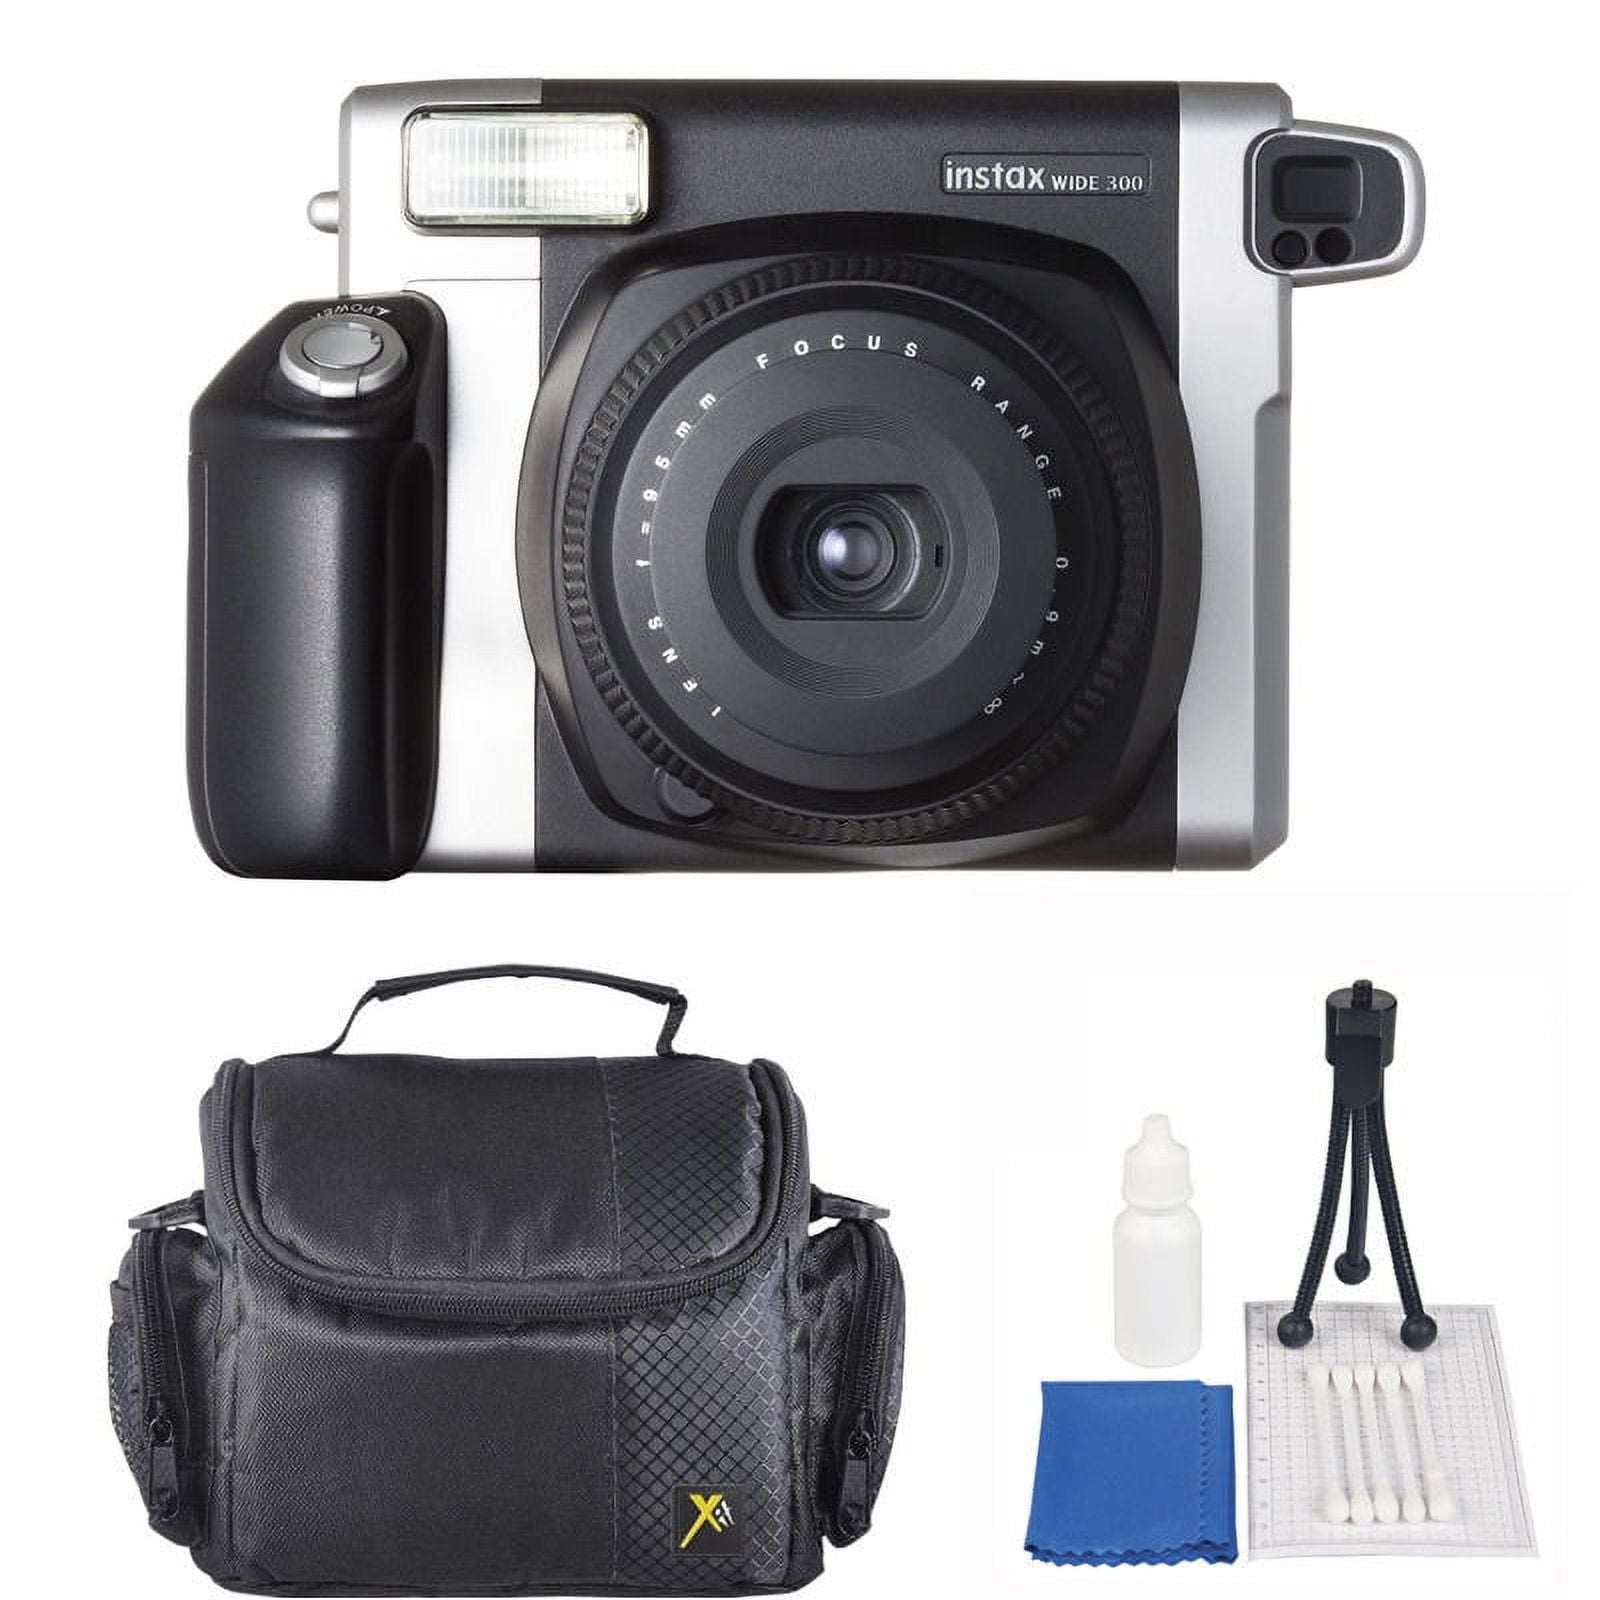 INSTAX® WIDE 300：Specifications